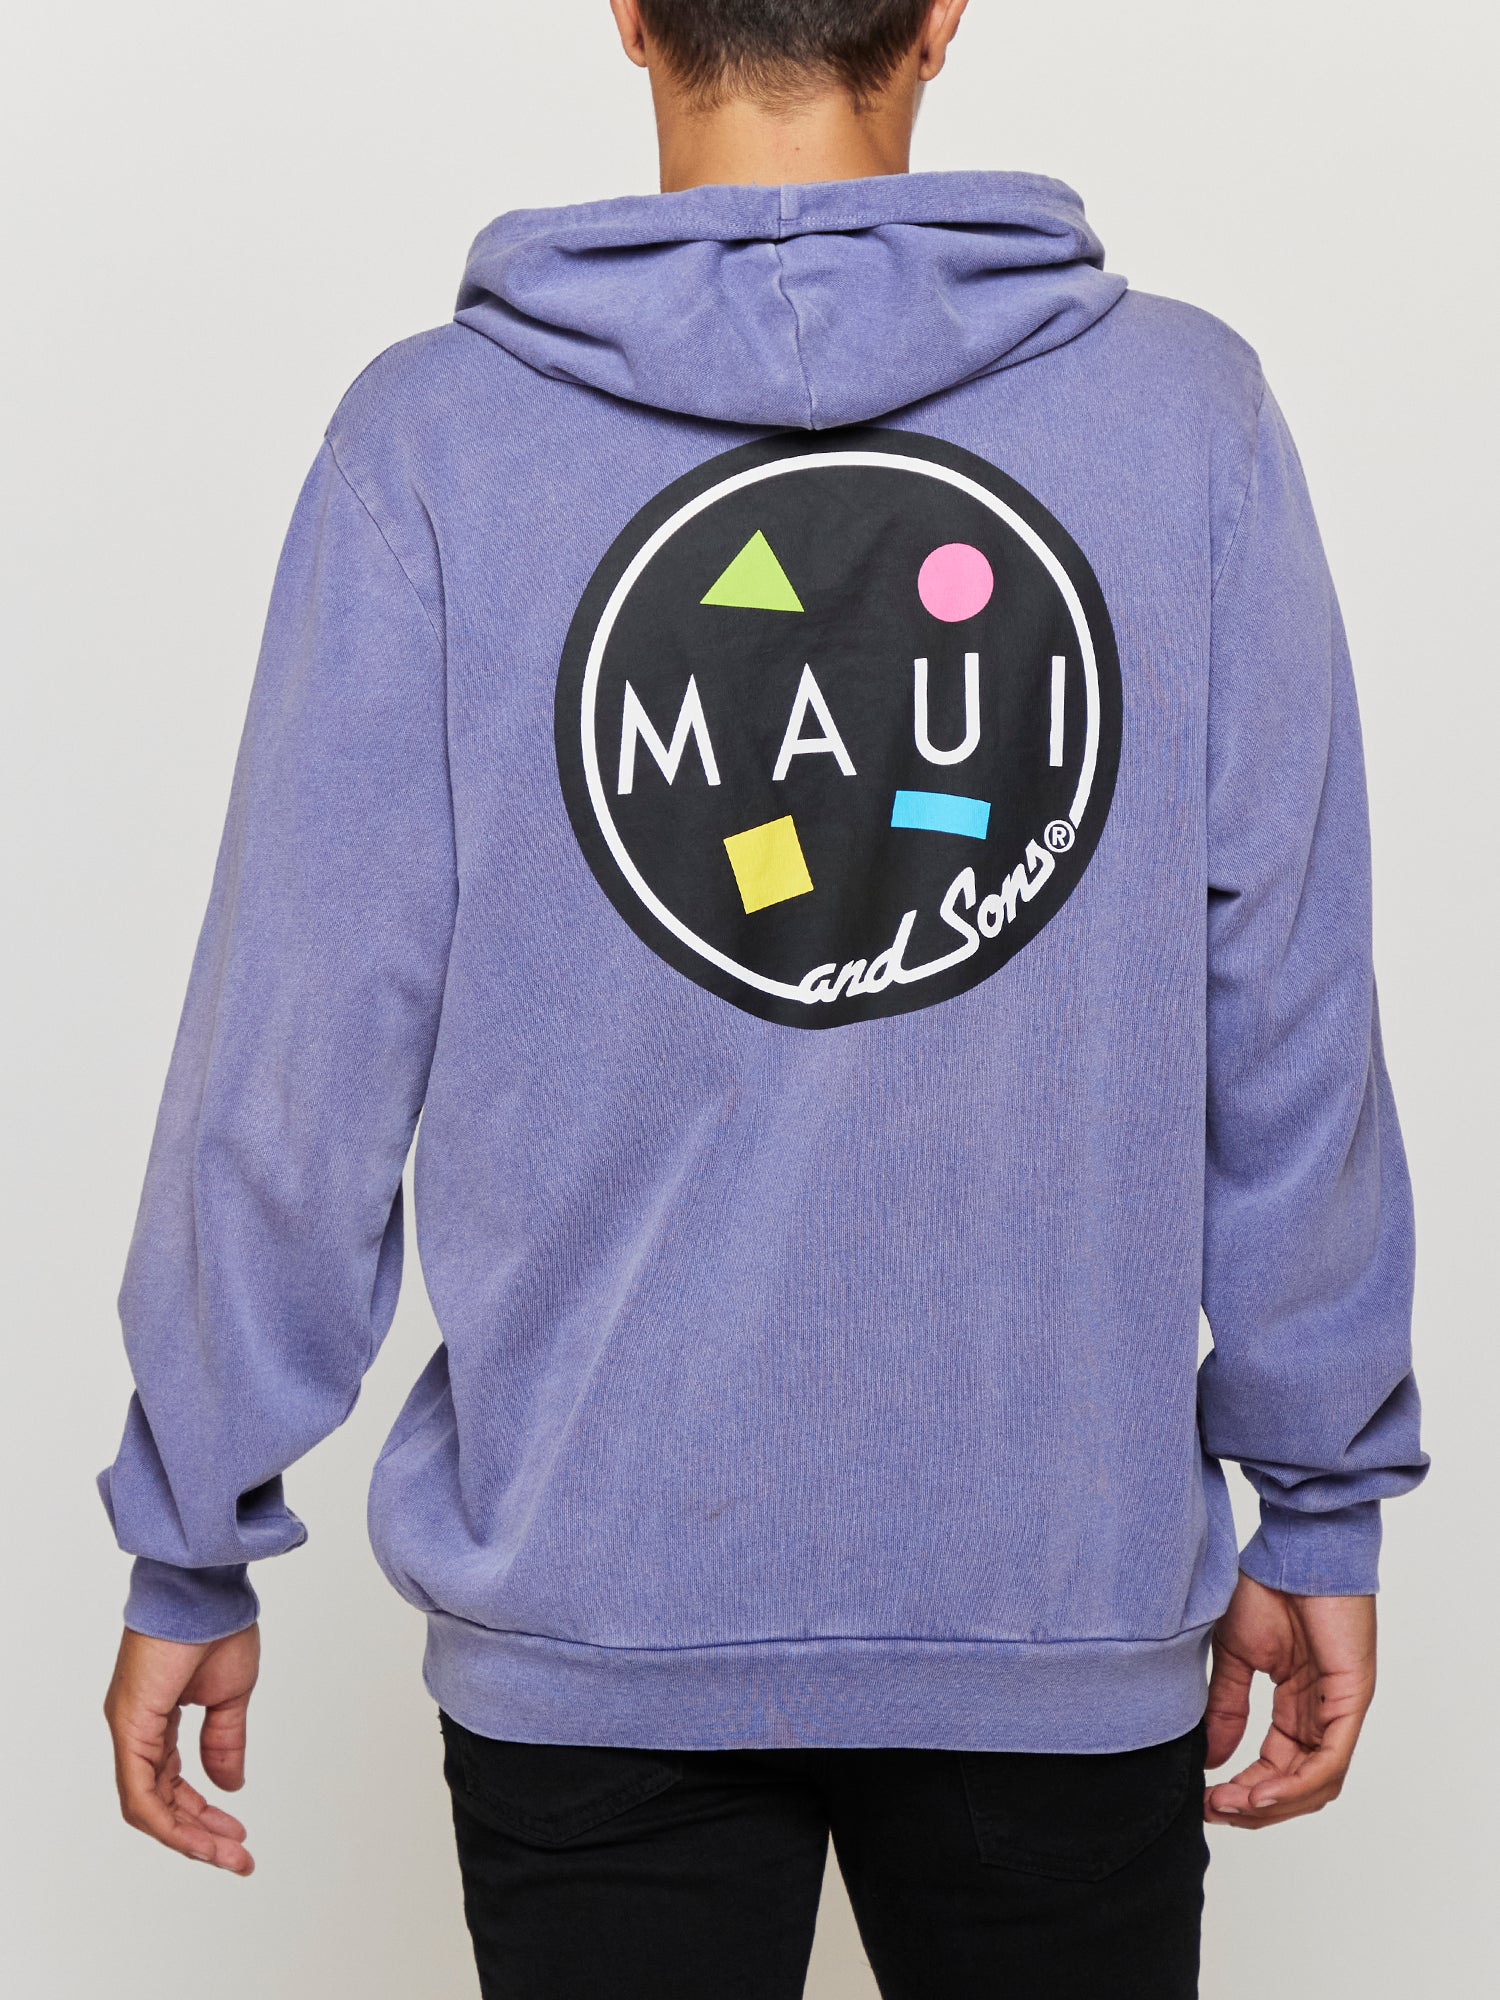 Maui and Sons Cookie Logo Men's Unisex Neon Pink T-shirt